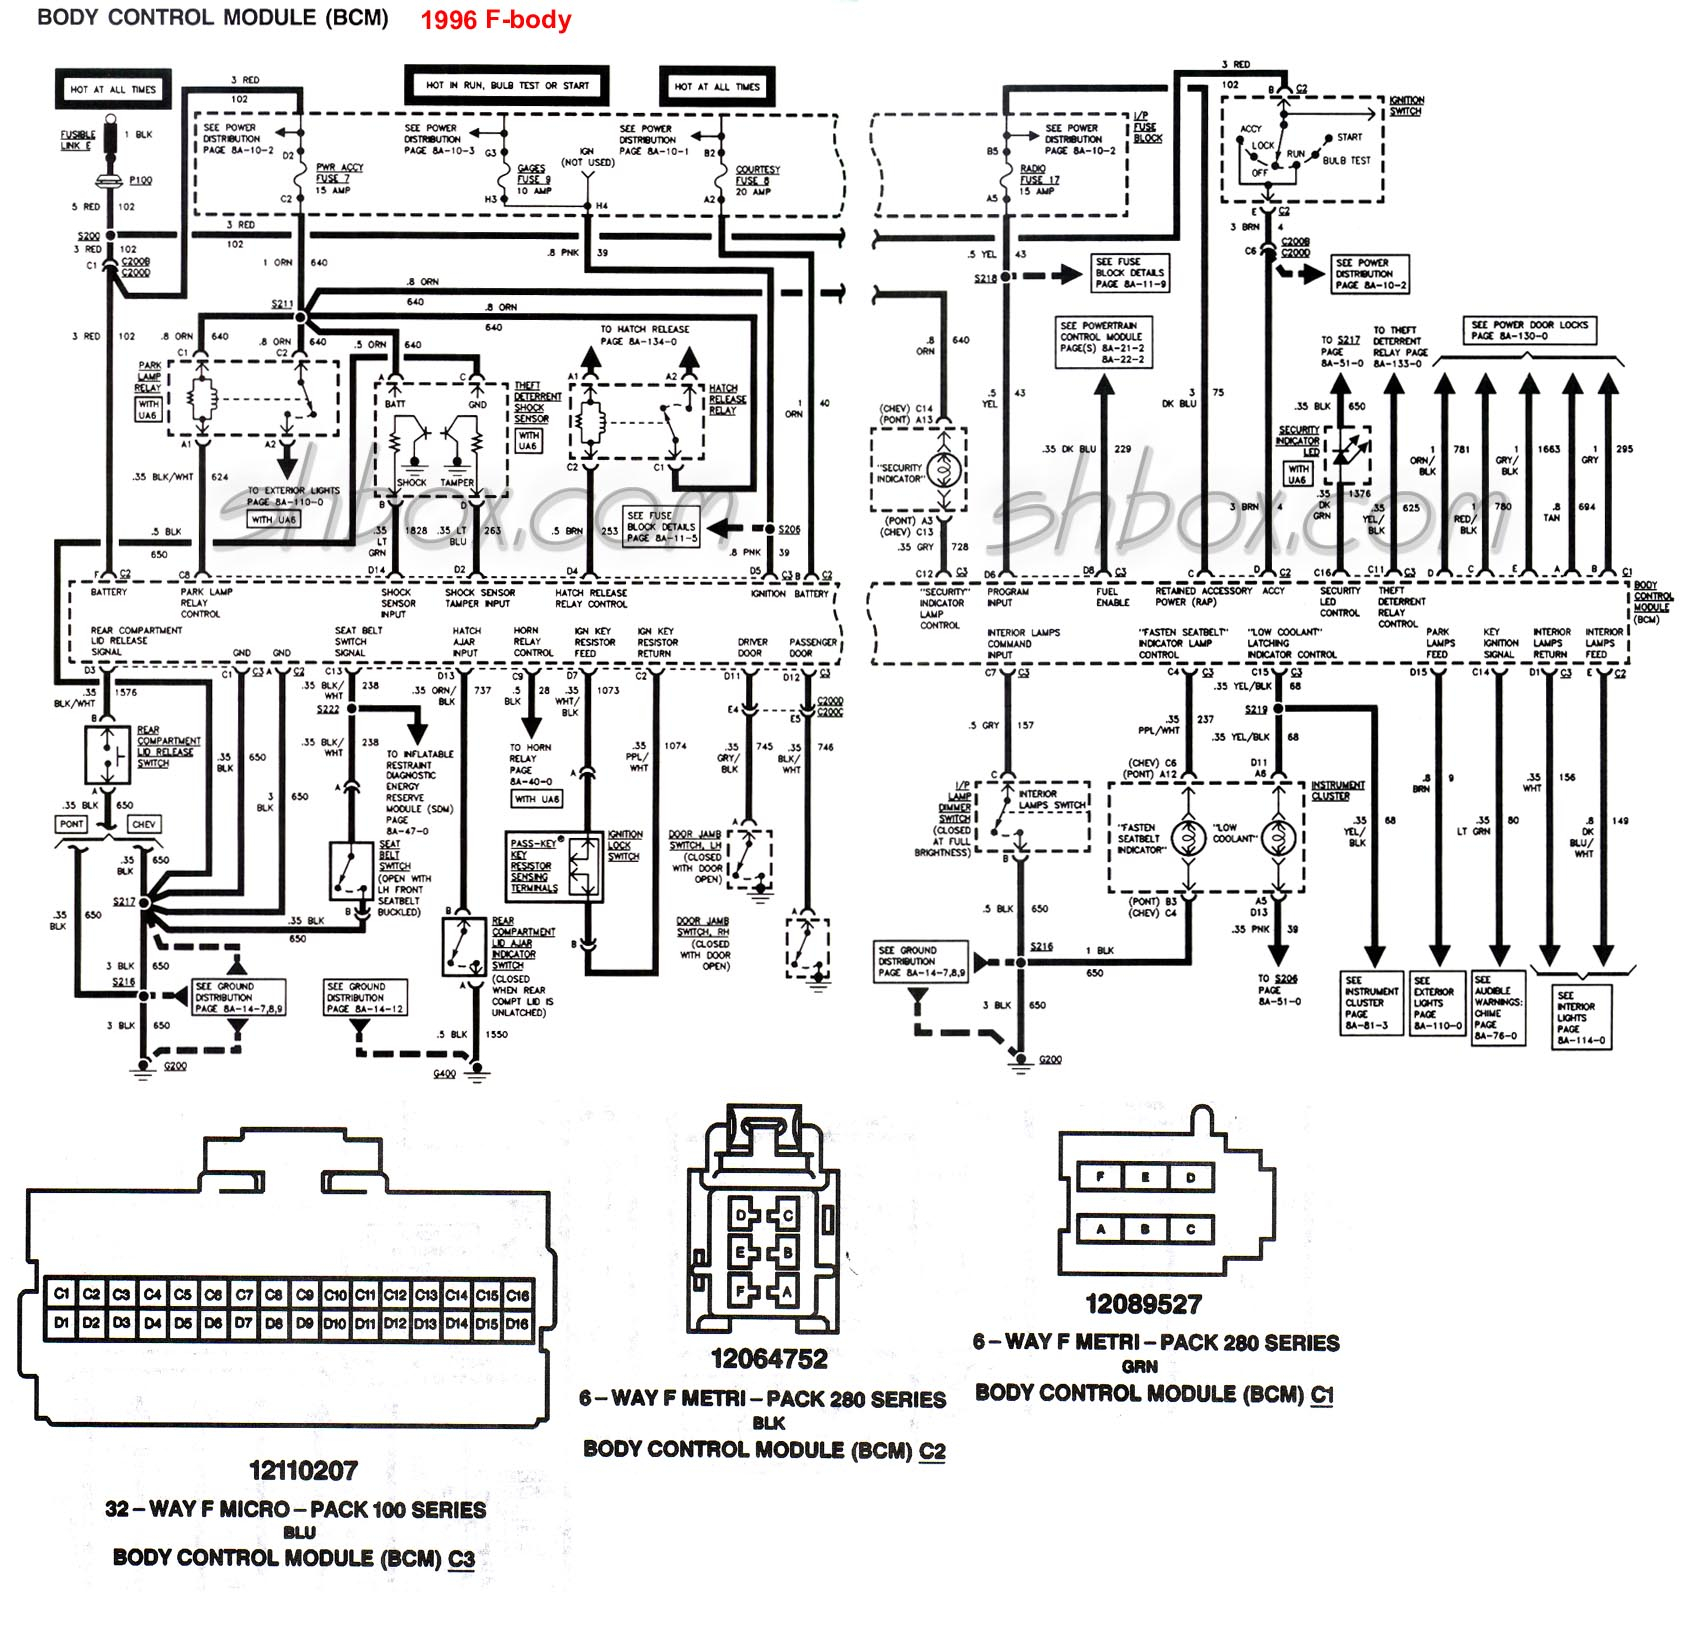 Passkey 3 Bypass Diagram F Body Wiring Diagram Wiring Diagram Article